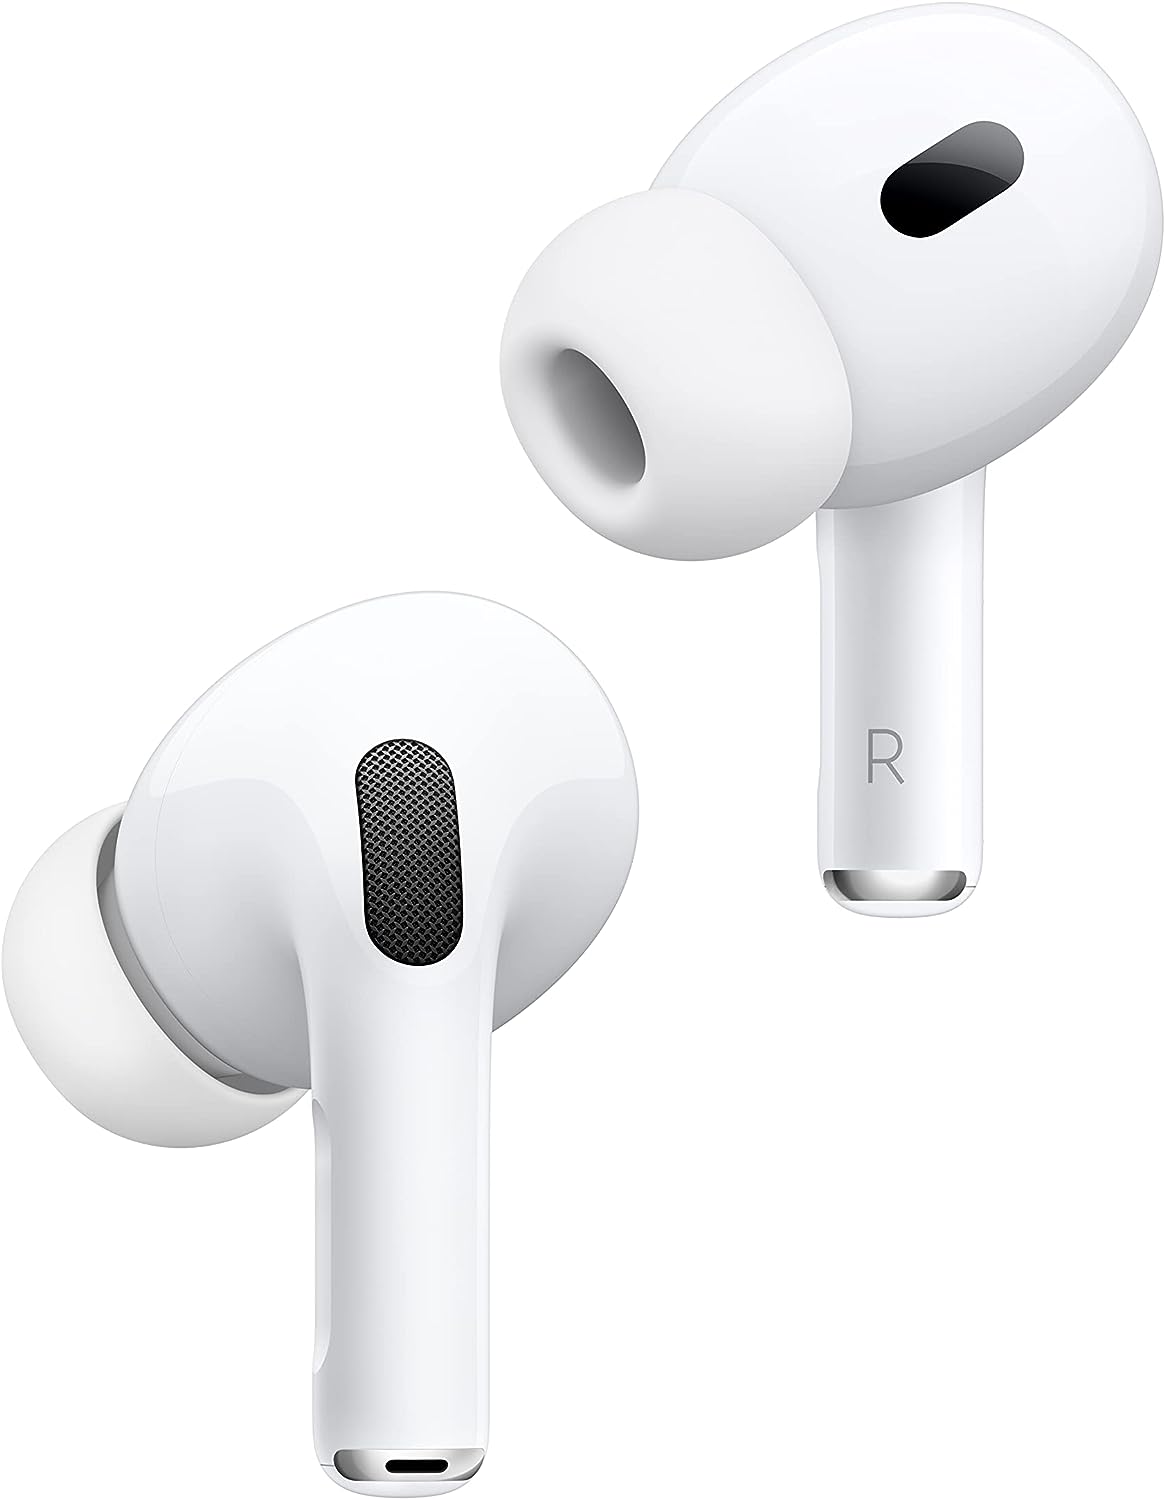 Apple AirPods Pro (2nd Gen) Wireless Earbuds, Up to 2X More Active Noise Cancelling, Adaptive Transparency, Personalized Spatial Audio MagSafe Charging Case (Lightning) Bluetooth Headphones for iPhone: Detailed Review & Recommendations